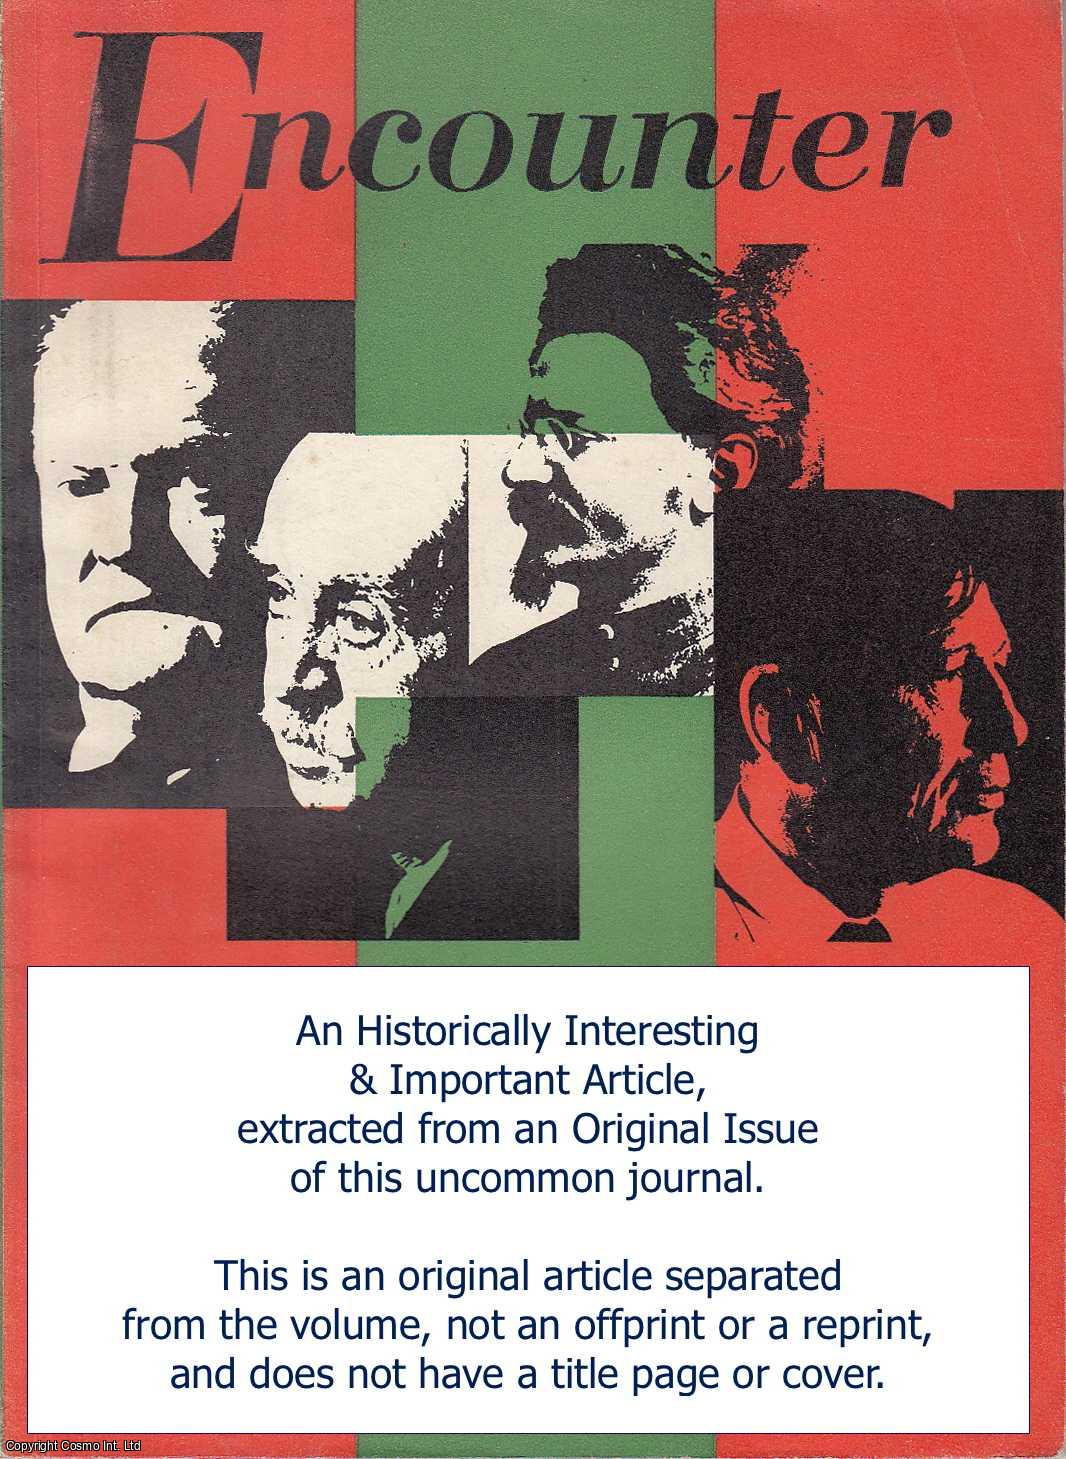 James Joll - Leon Blum. An original article from Encounter, a monthly review of literature, the arts and politics, 1957.